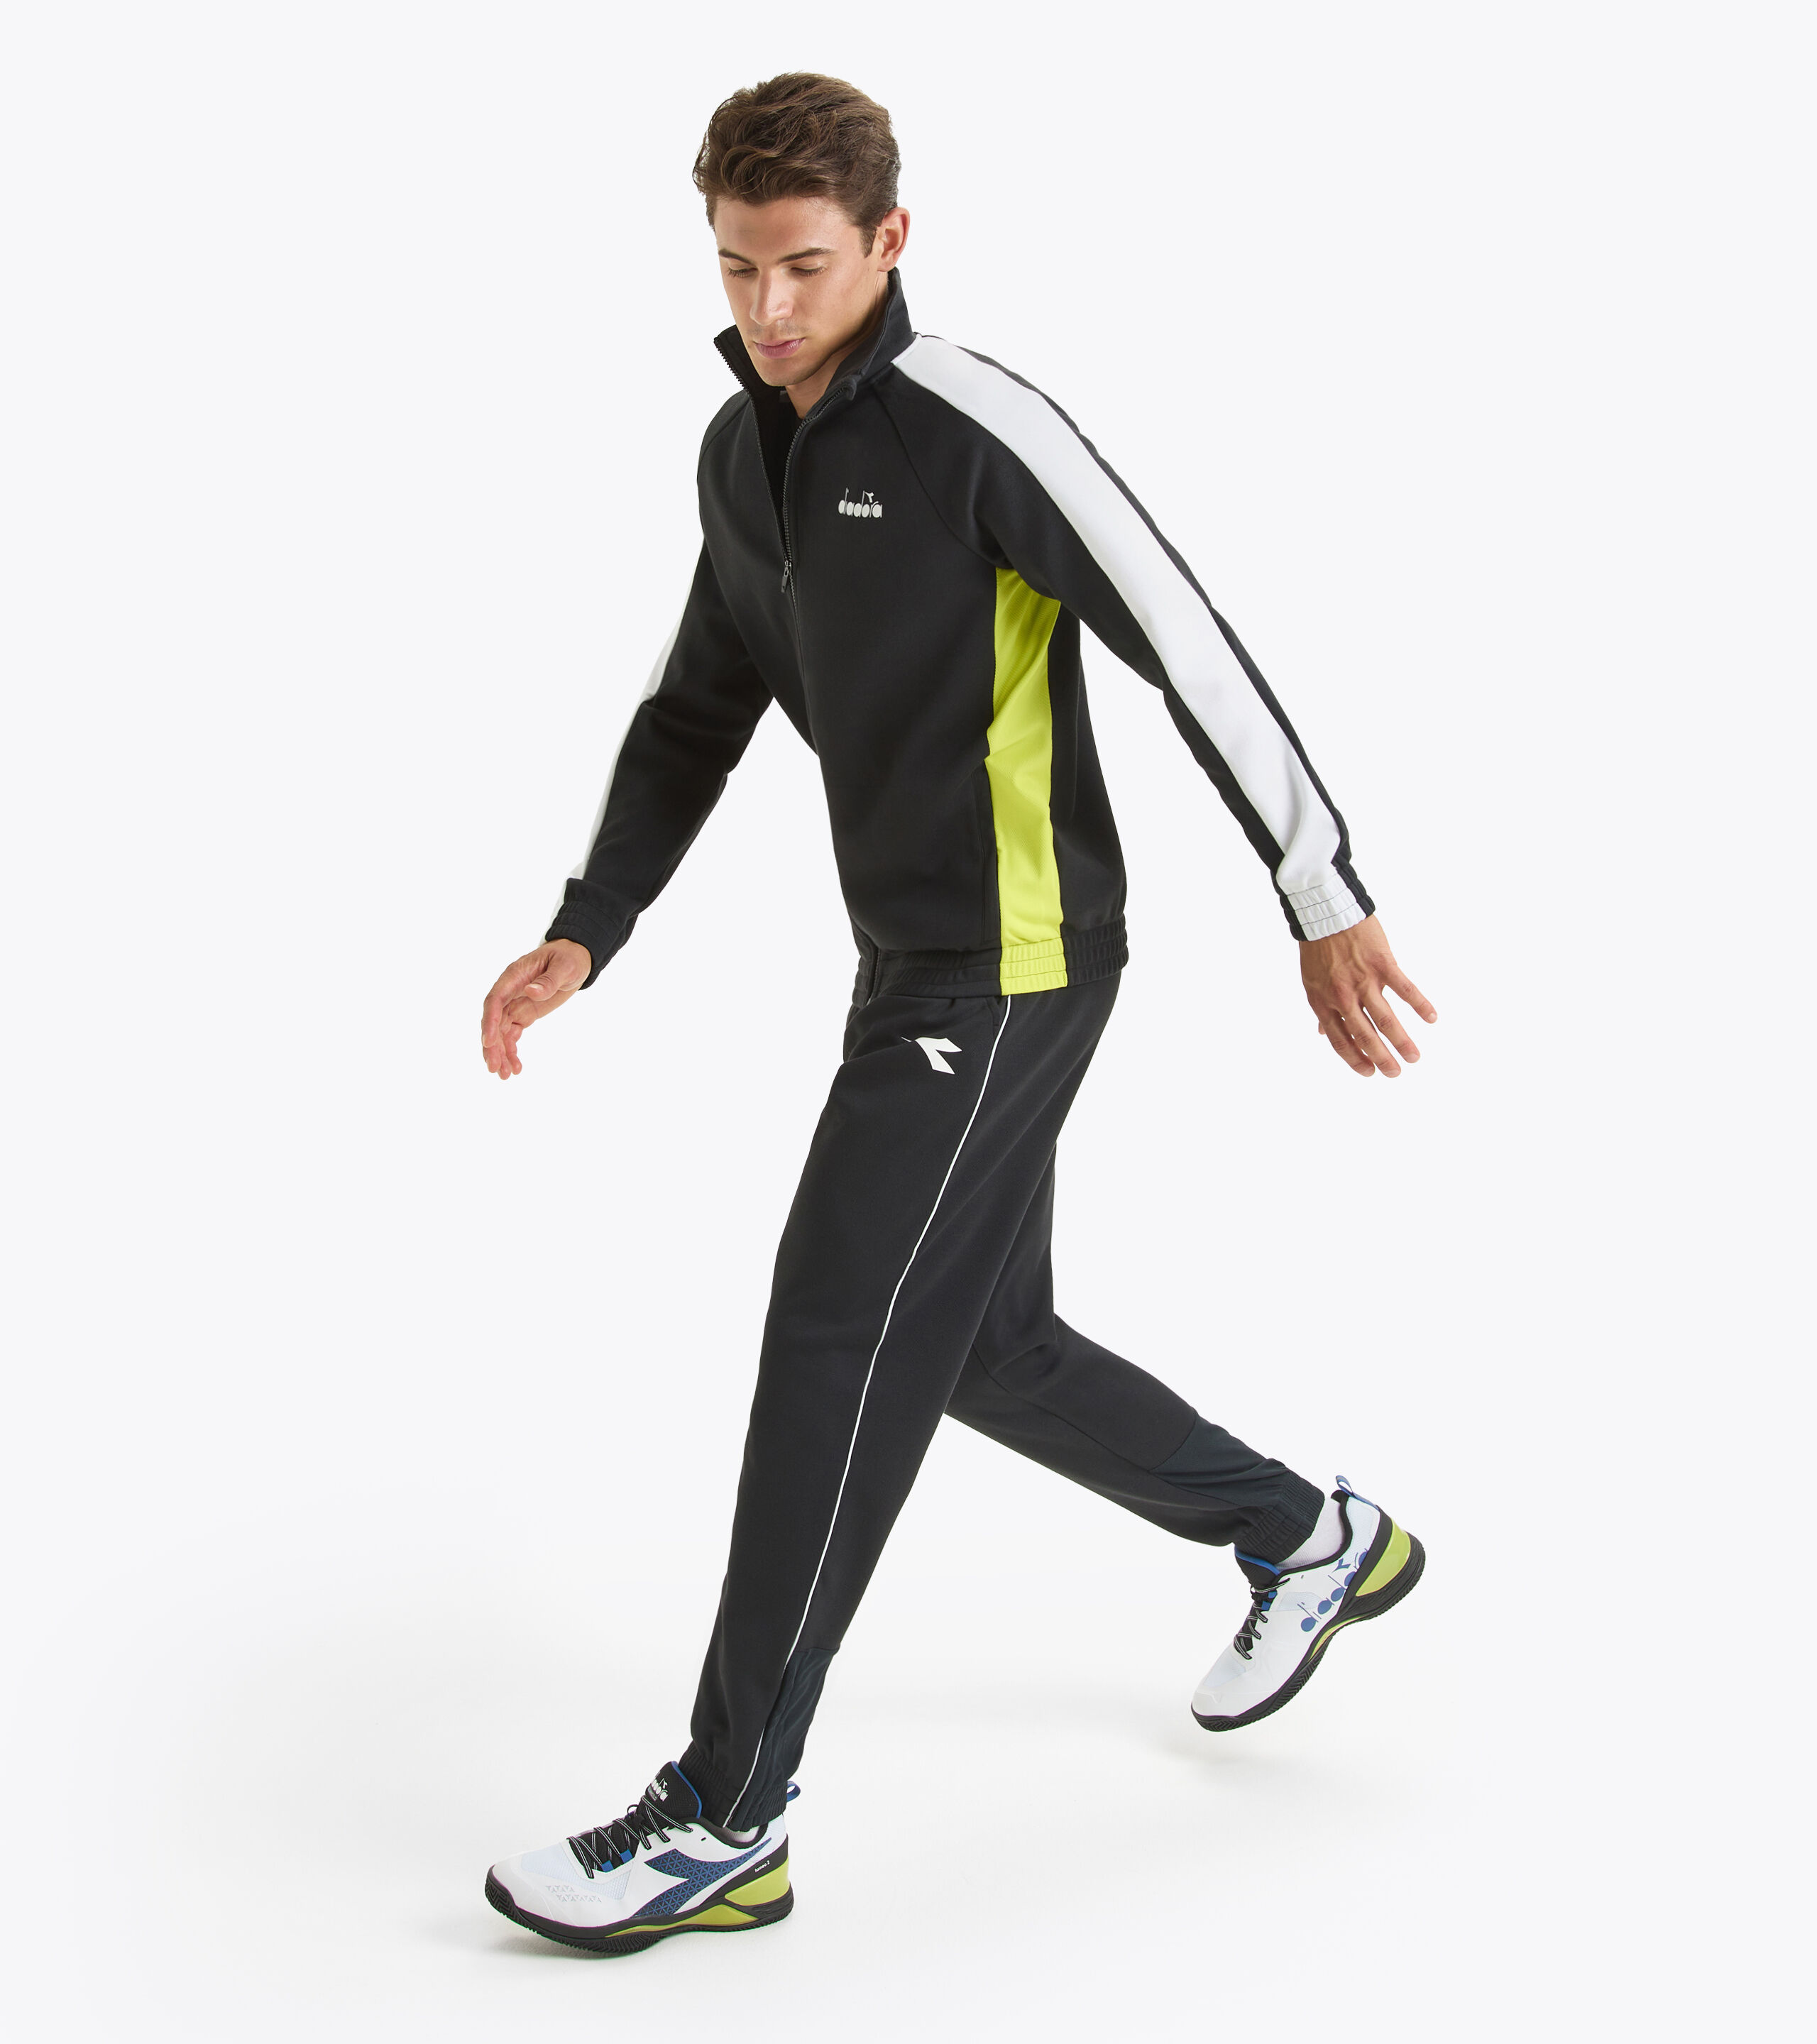 Men's Tracksuits - Buy Men's Tracksuits Online Starting at Just ₹304 |  Meesho